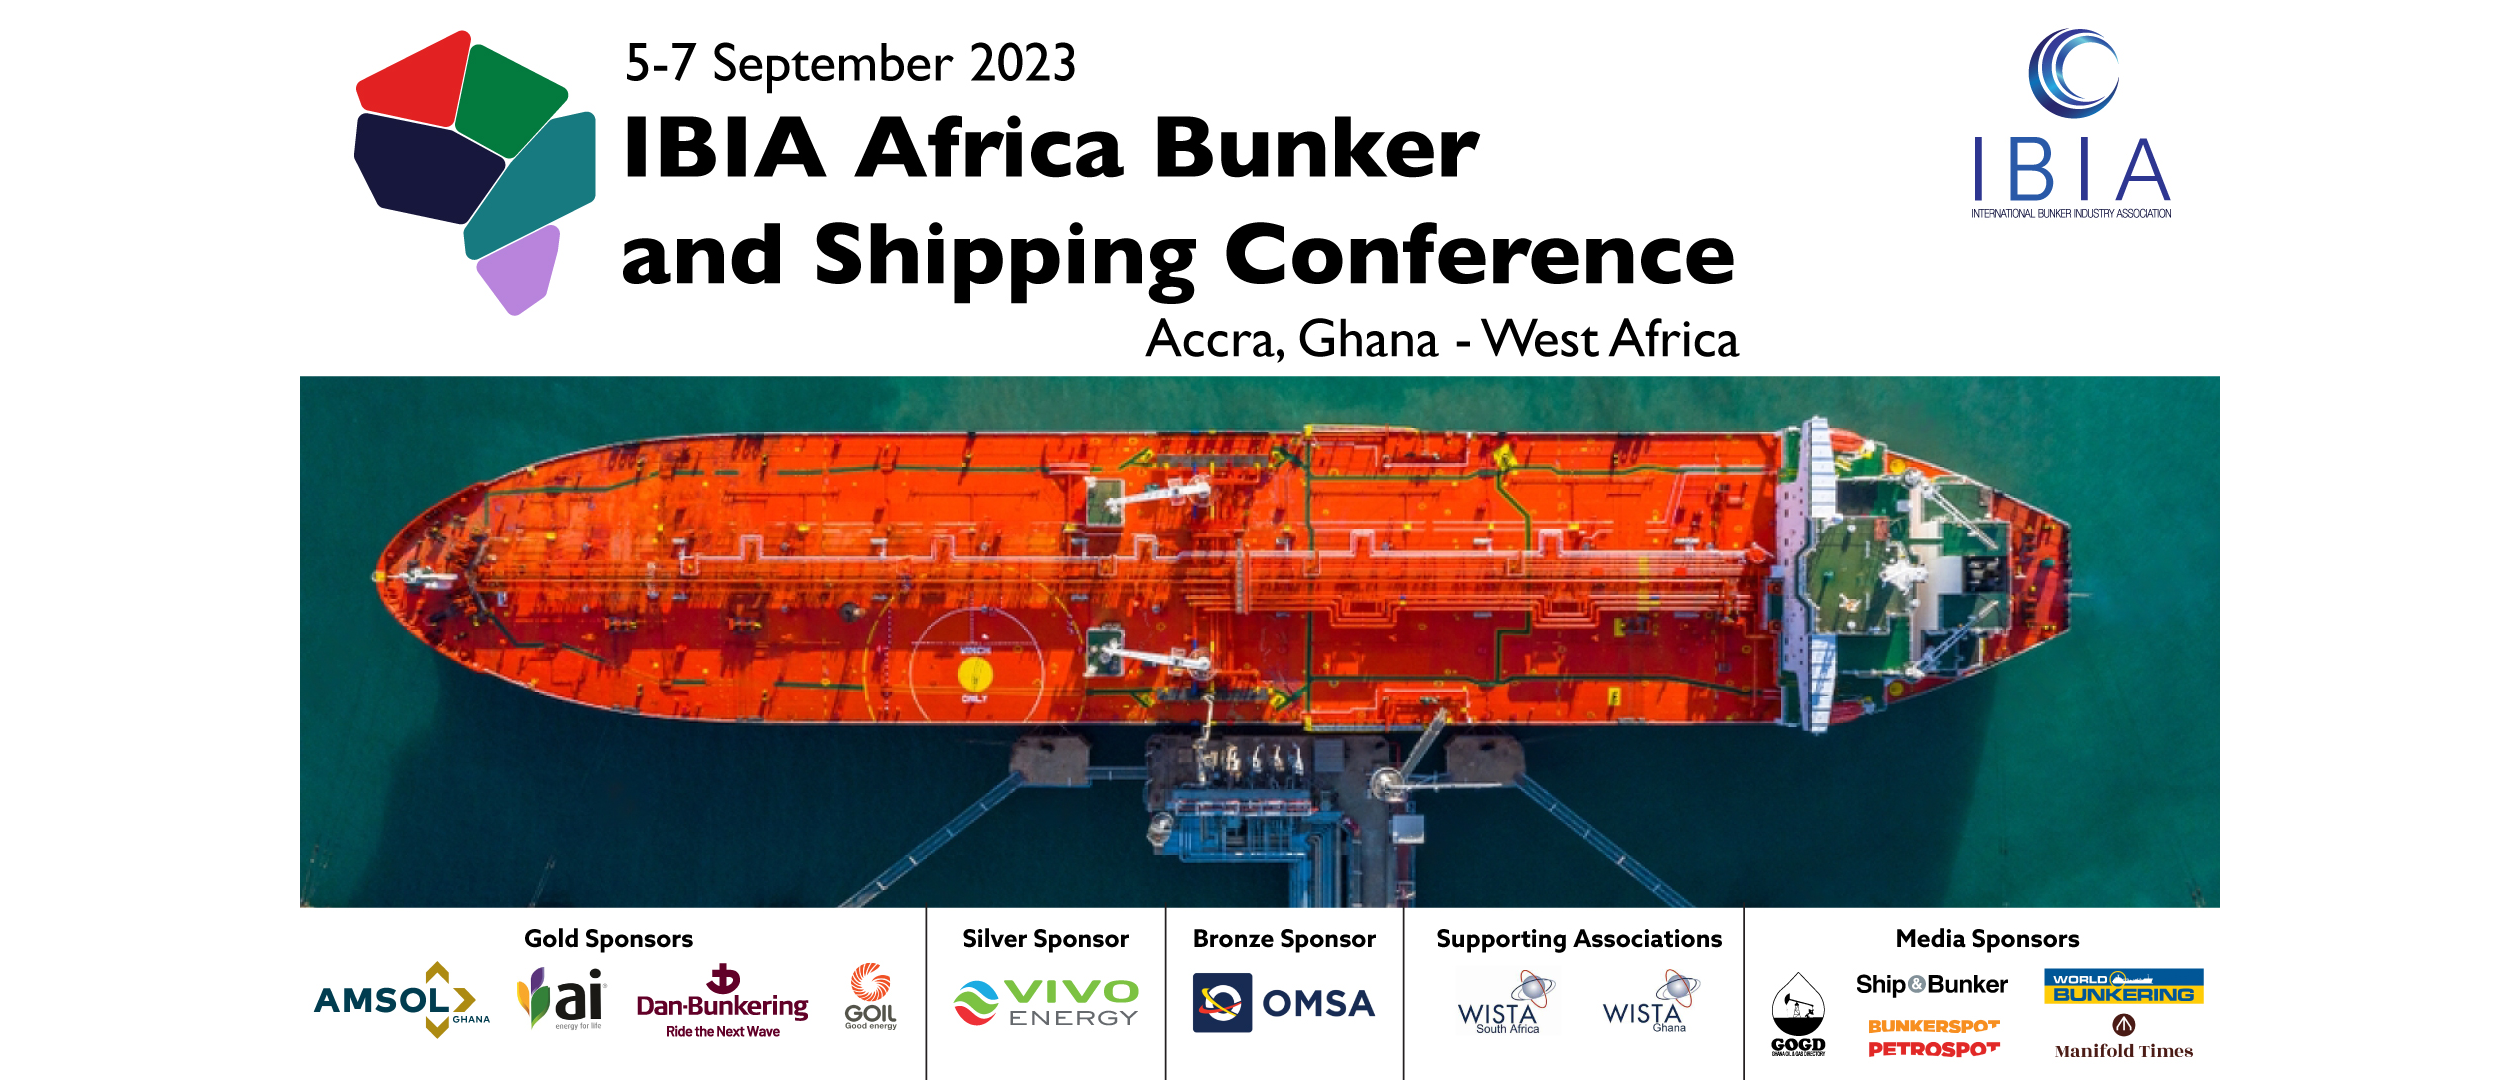 IBIA Africa Bunker and Shipping Conference – Day 2